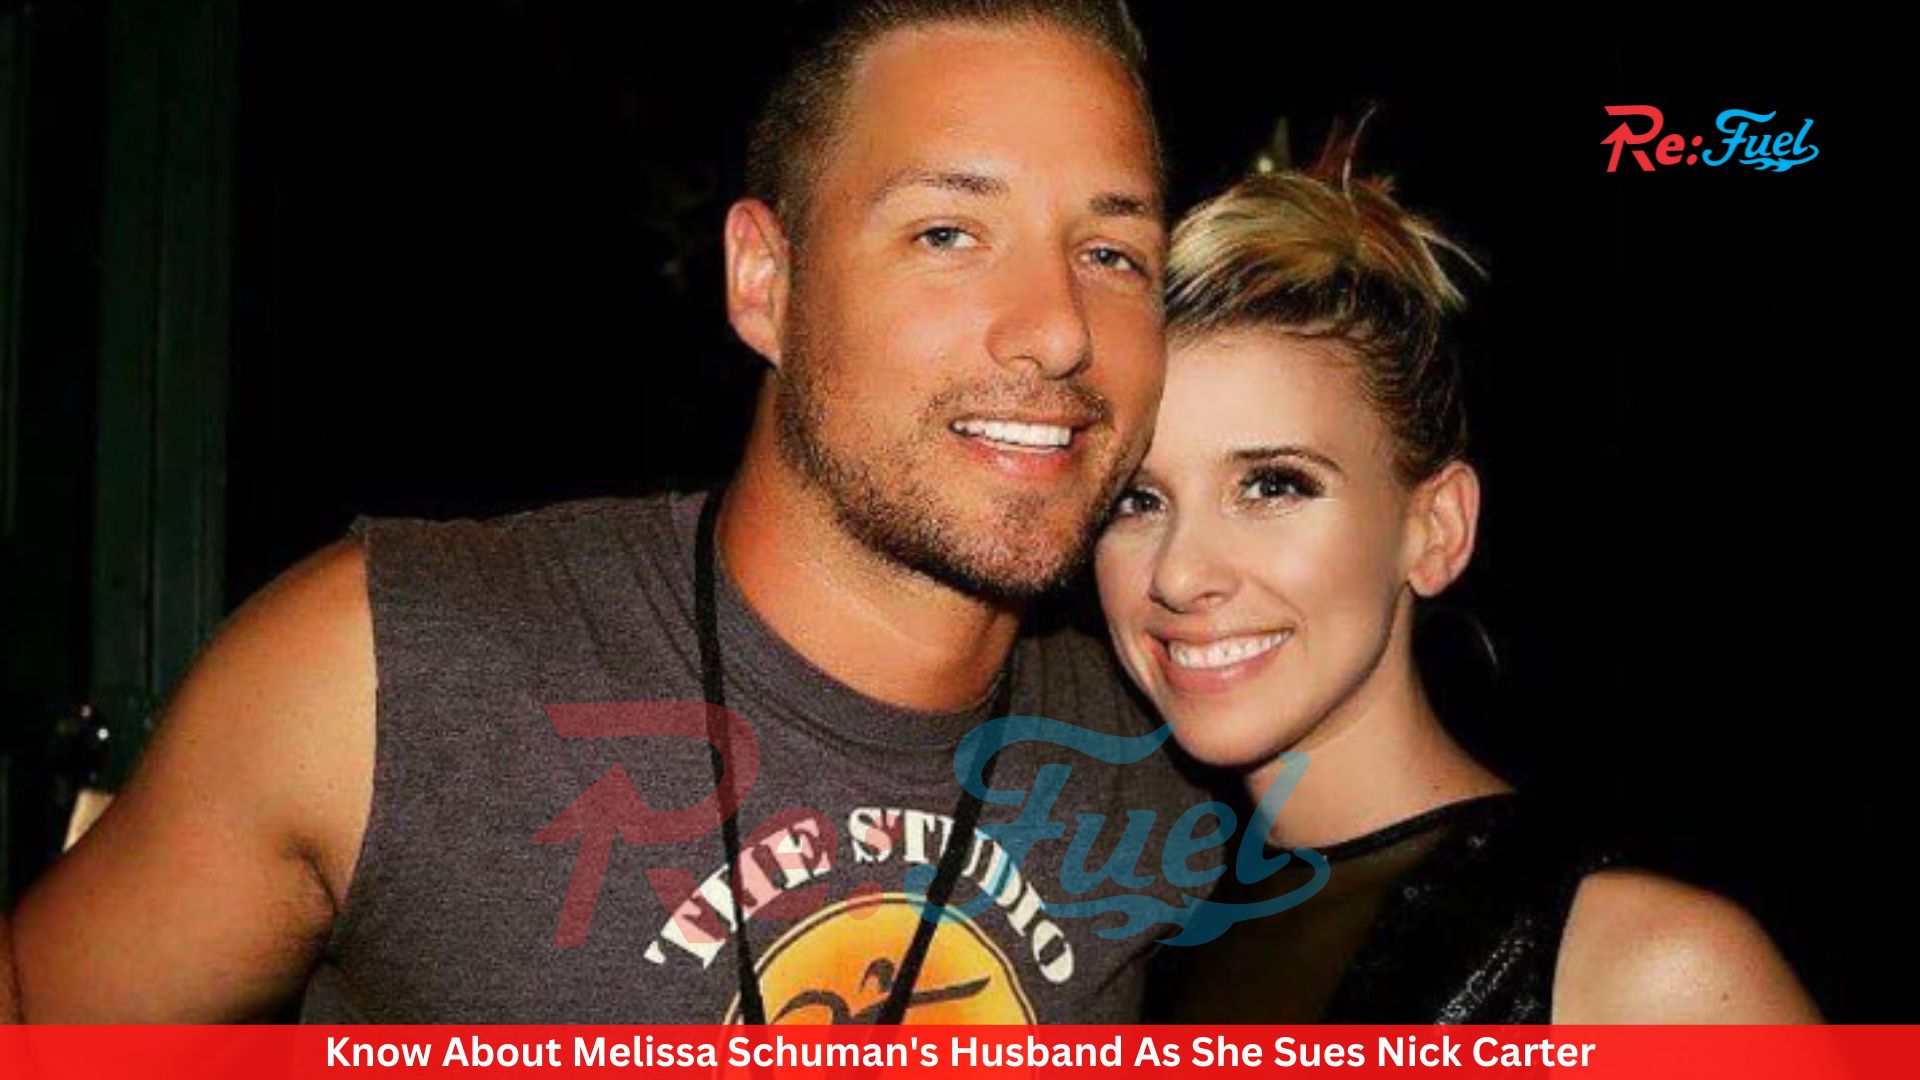 Know About Melissa Schuman's Husband As She Sues Nick Carter